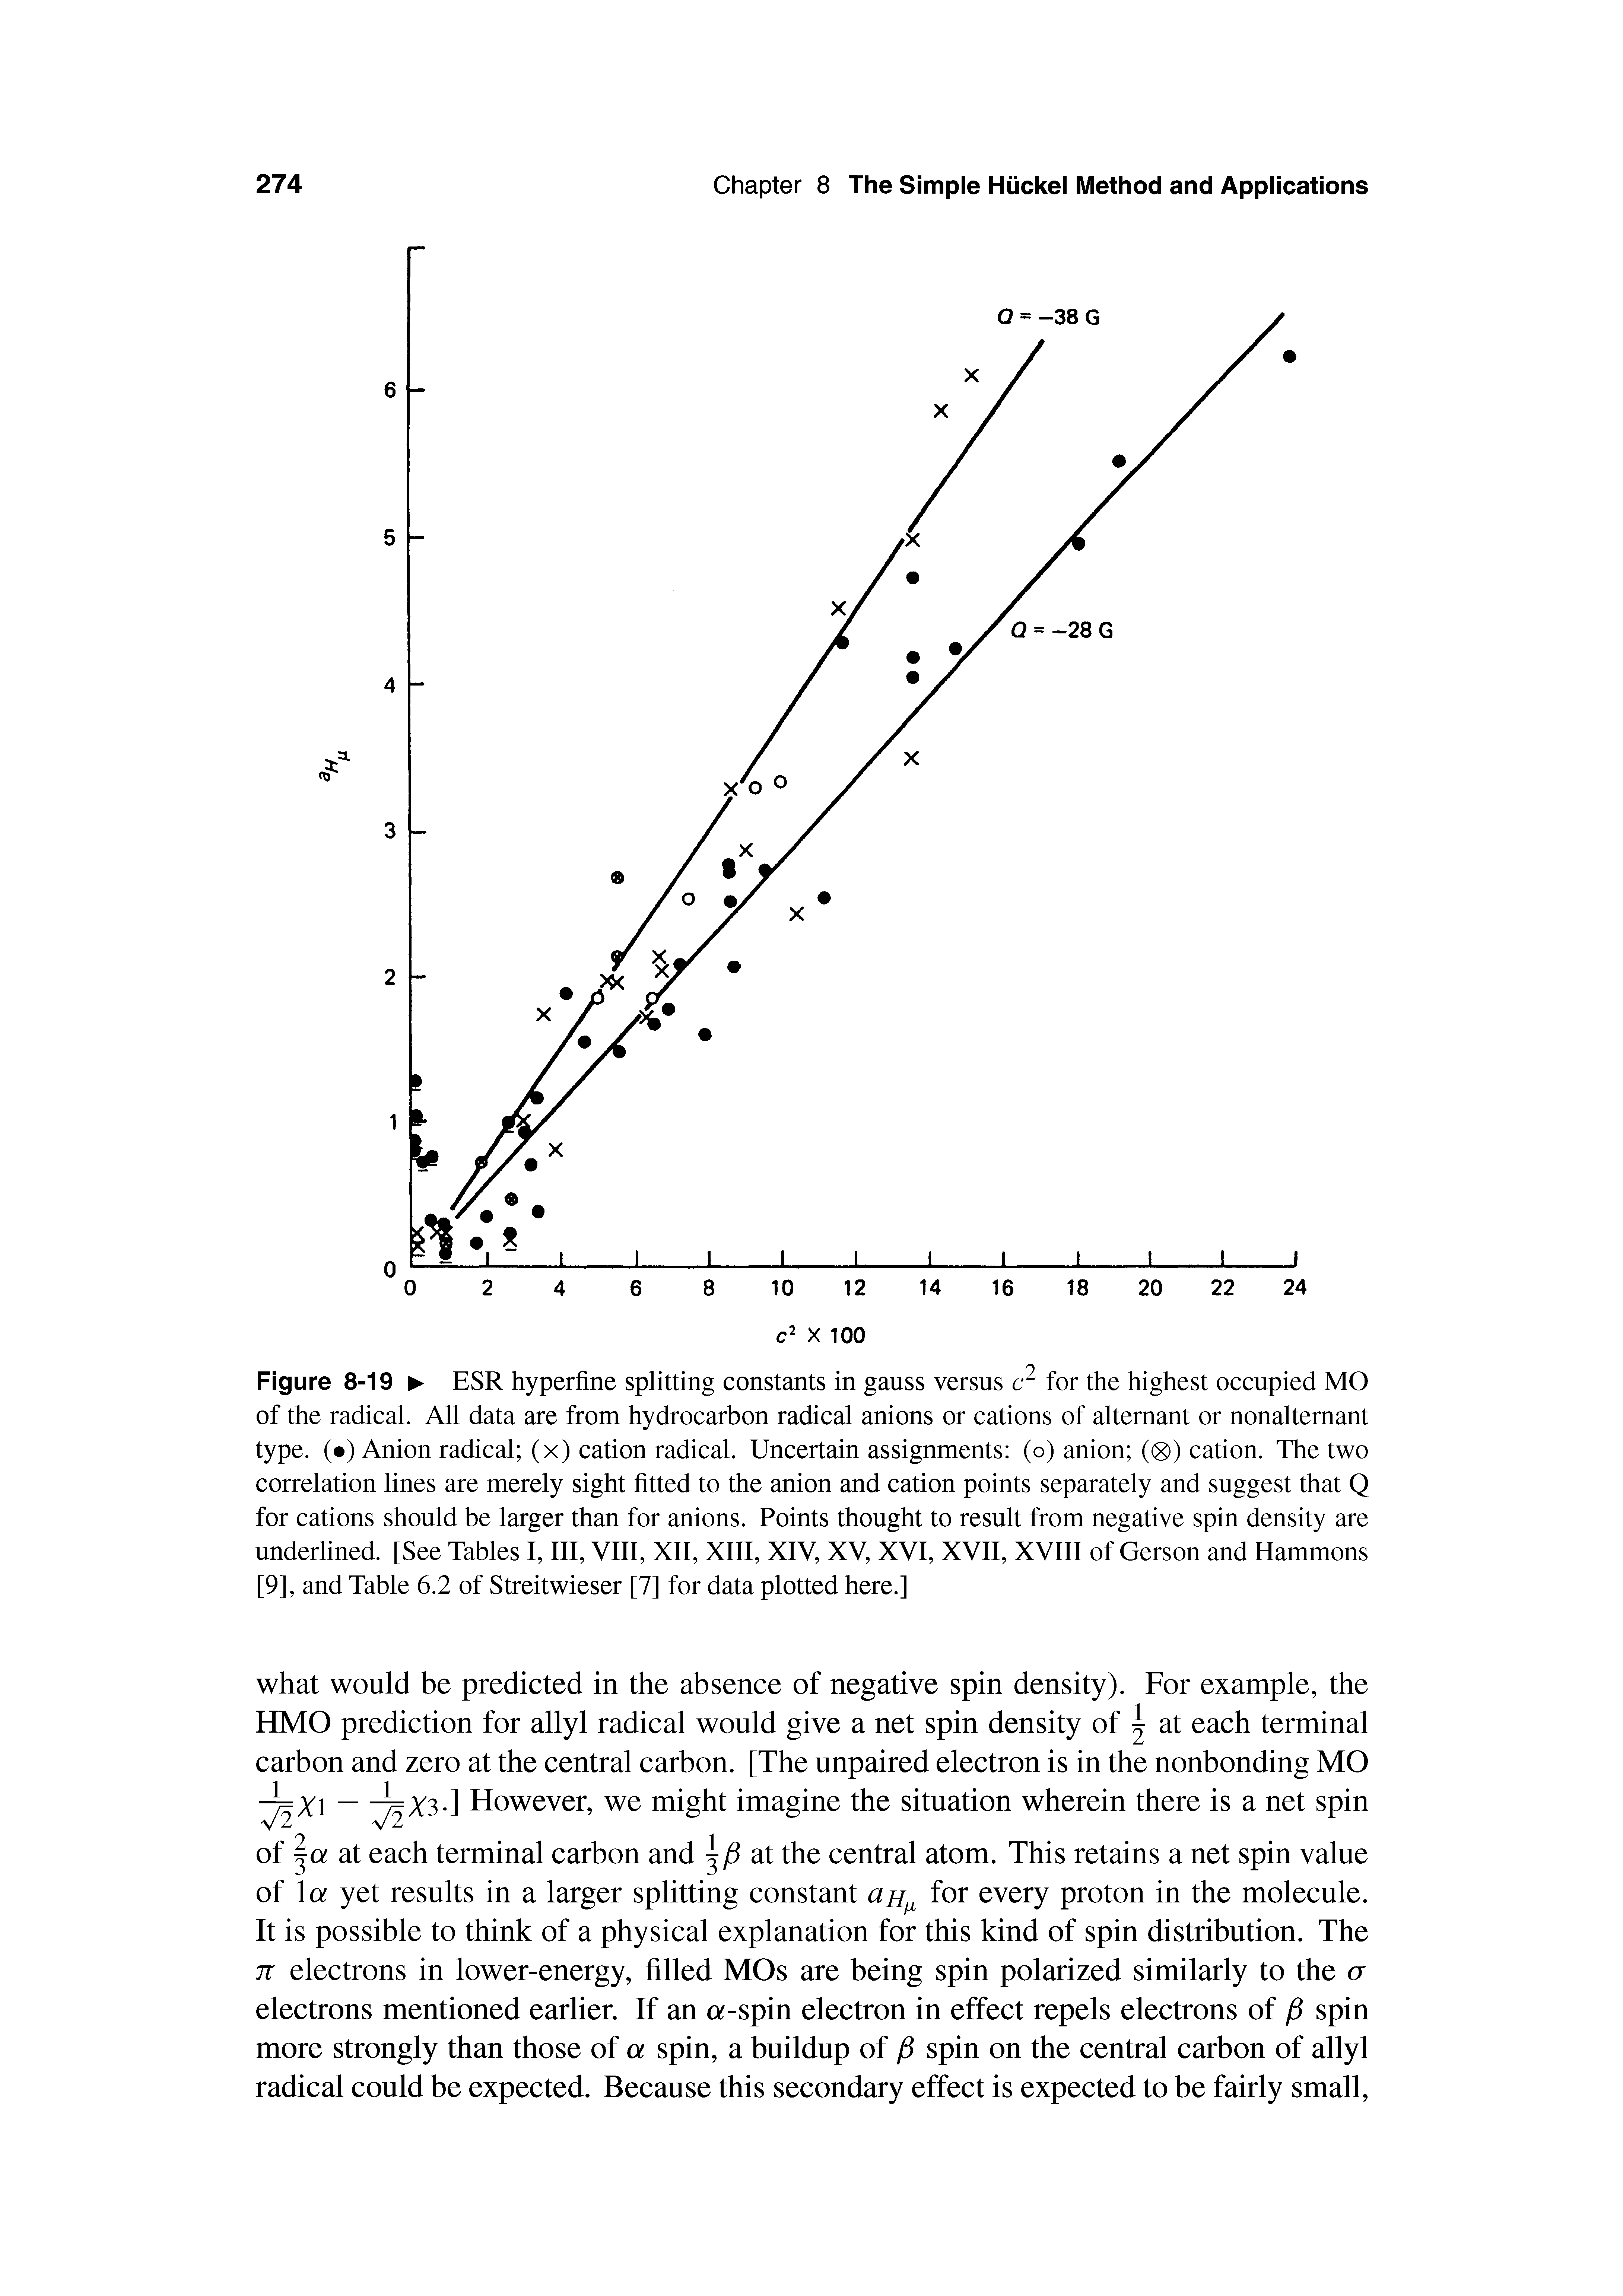 Figure 8-19 ESR hyperfine splitting constants in gauss versus for the highest occupied MO of the radical. All data are from hydrocarbon radical anions or cations of alternant or nonaltemant type. ( ) Anion radical (x) cation radical. Uncertain assignments (o) anion ((g)) cation. The two correlation lines are merely sight fitted to the anion and cation points separately and suggest that Q for cations should be larger than for anions. Points thought to result from negative spin density are underlined. [See Tables I, III, VIII, XII, XIII, XIV, XV, XVI, XVII, XVIII of Gerson and Hammons [9], and Table 6.2 of Streitwieser [7] for data plotted here.]...